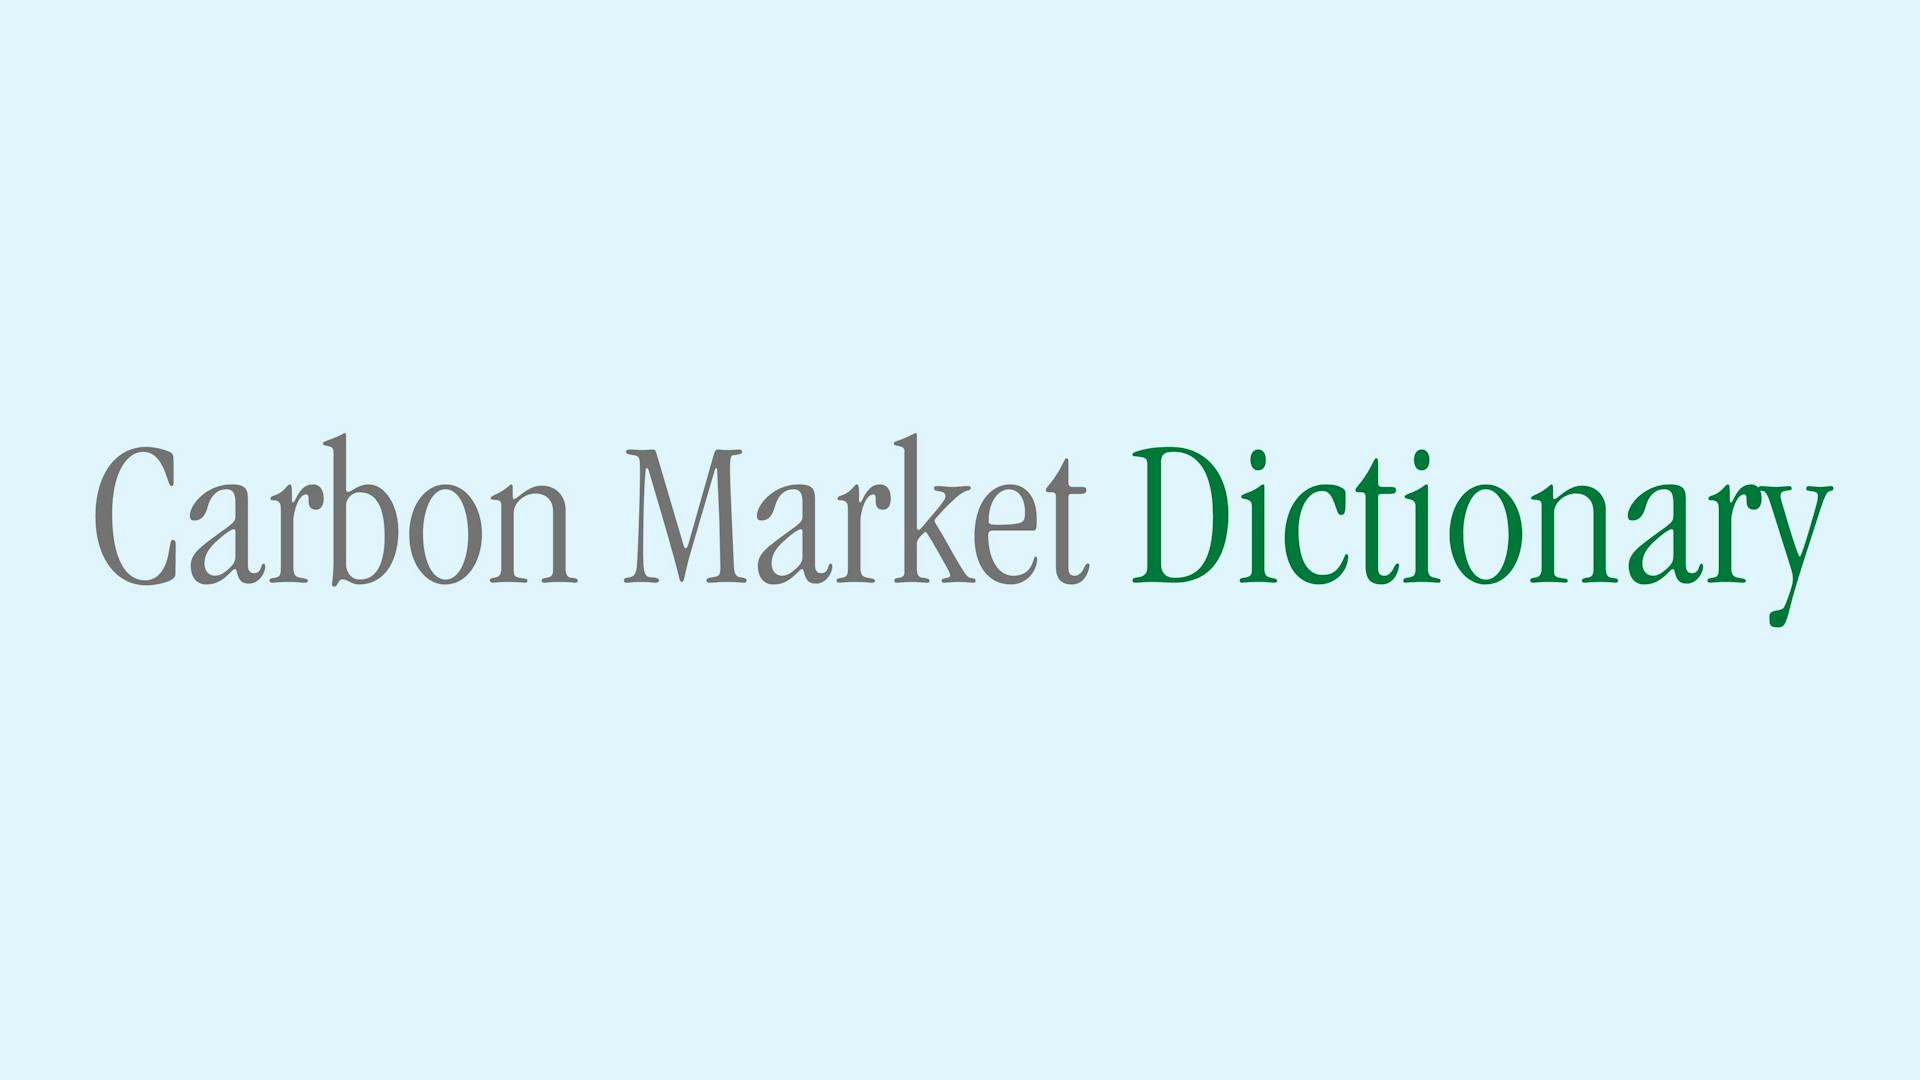 title of the article "Carbon Market Dictionary"